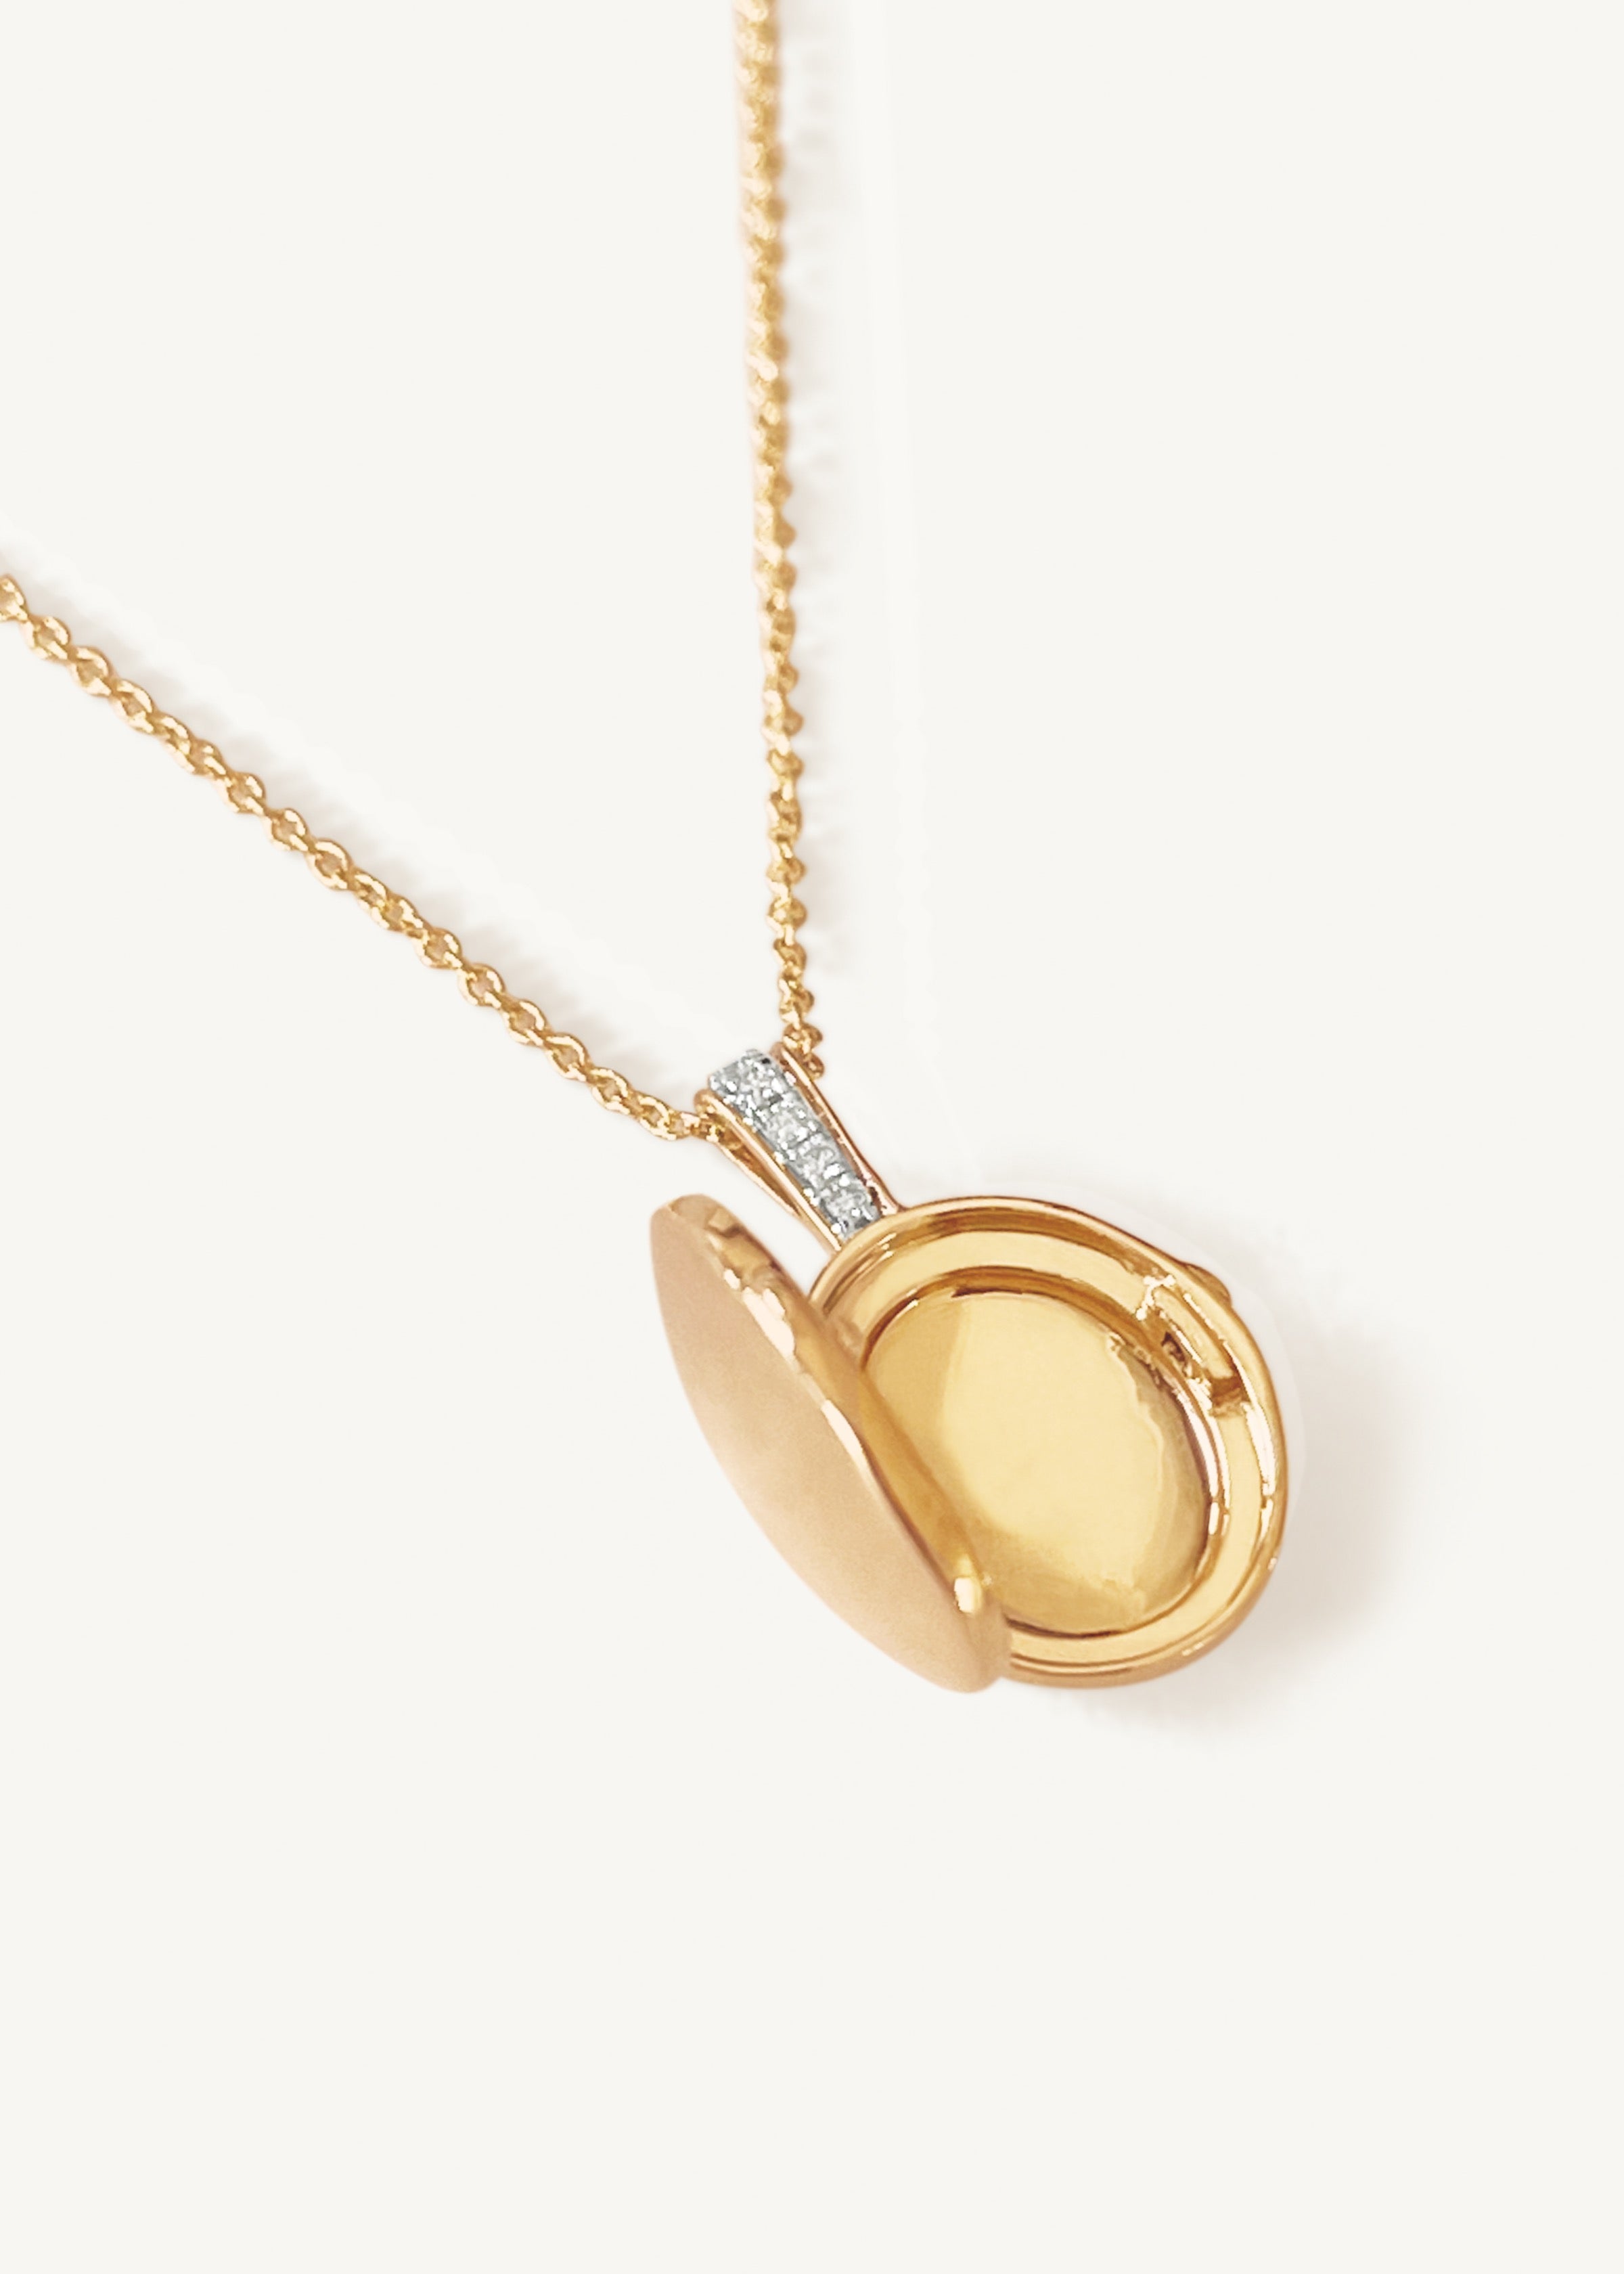 alt="Maison Oval Locket II opened with micro rolo chain necklace"